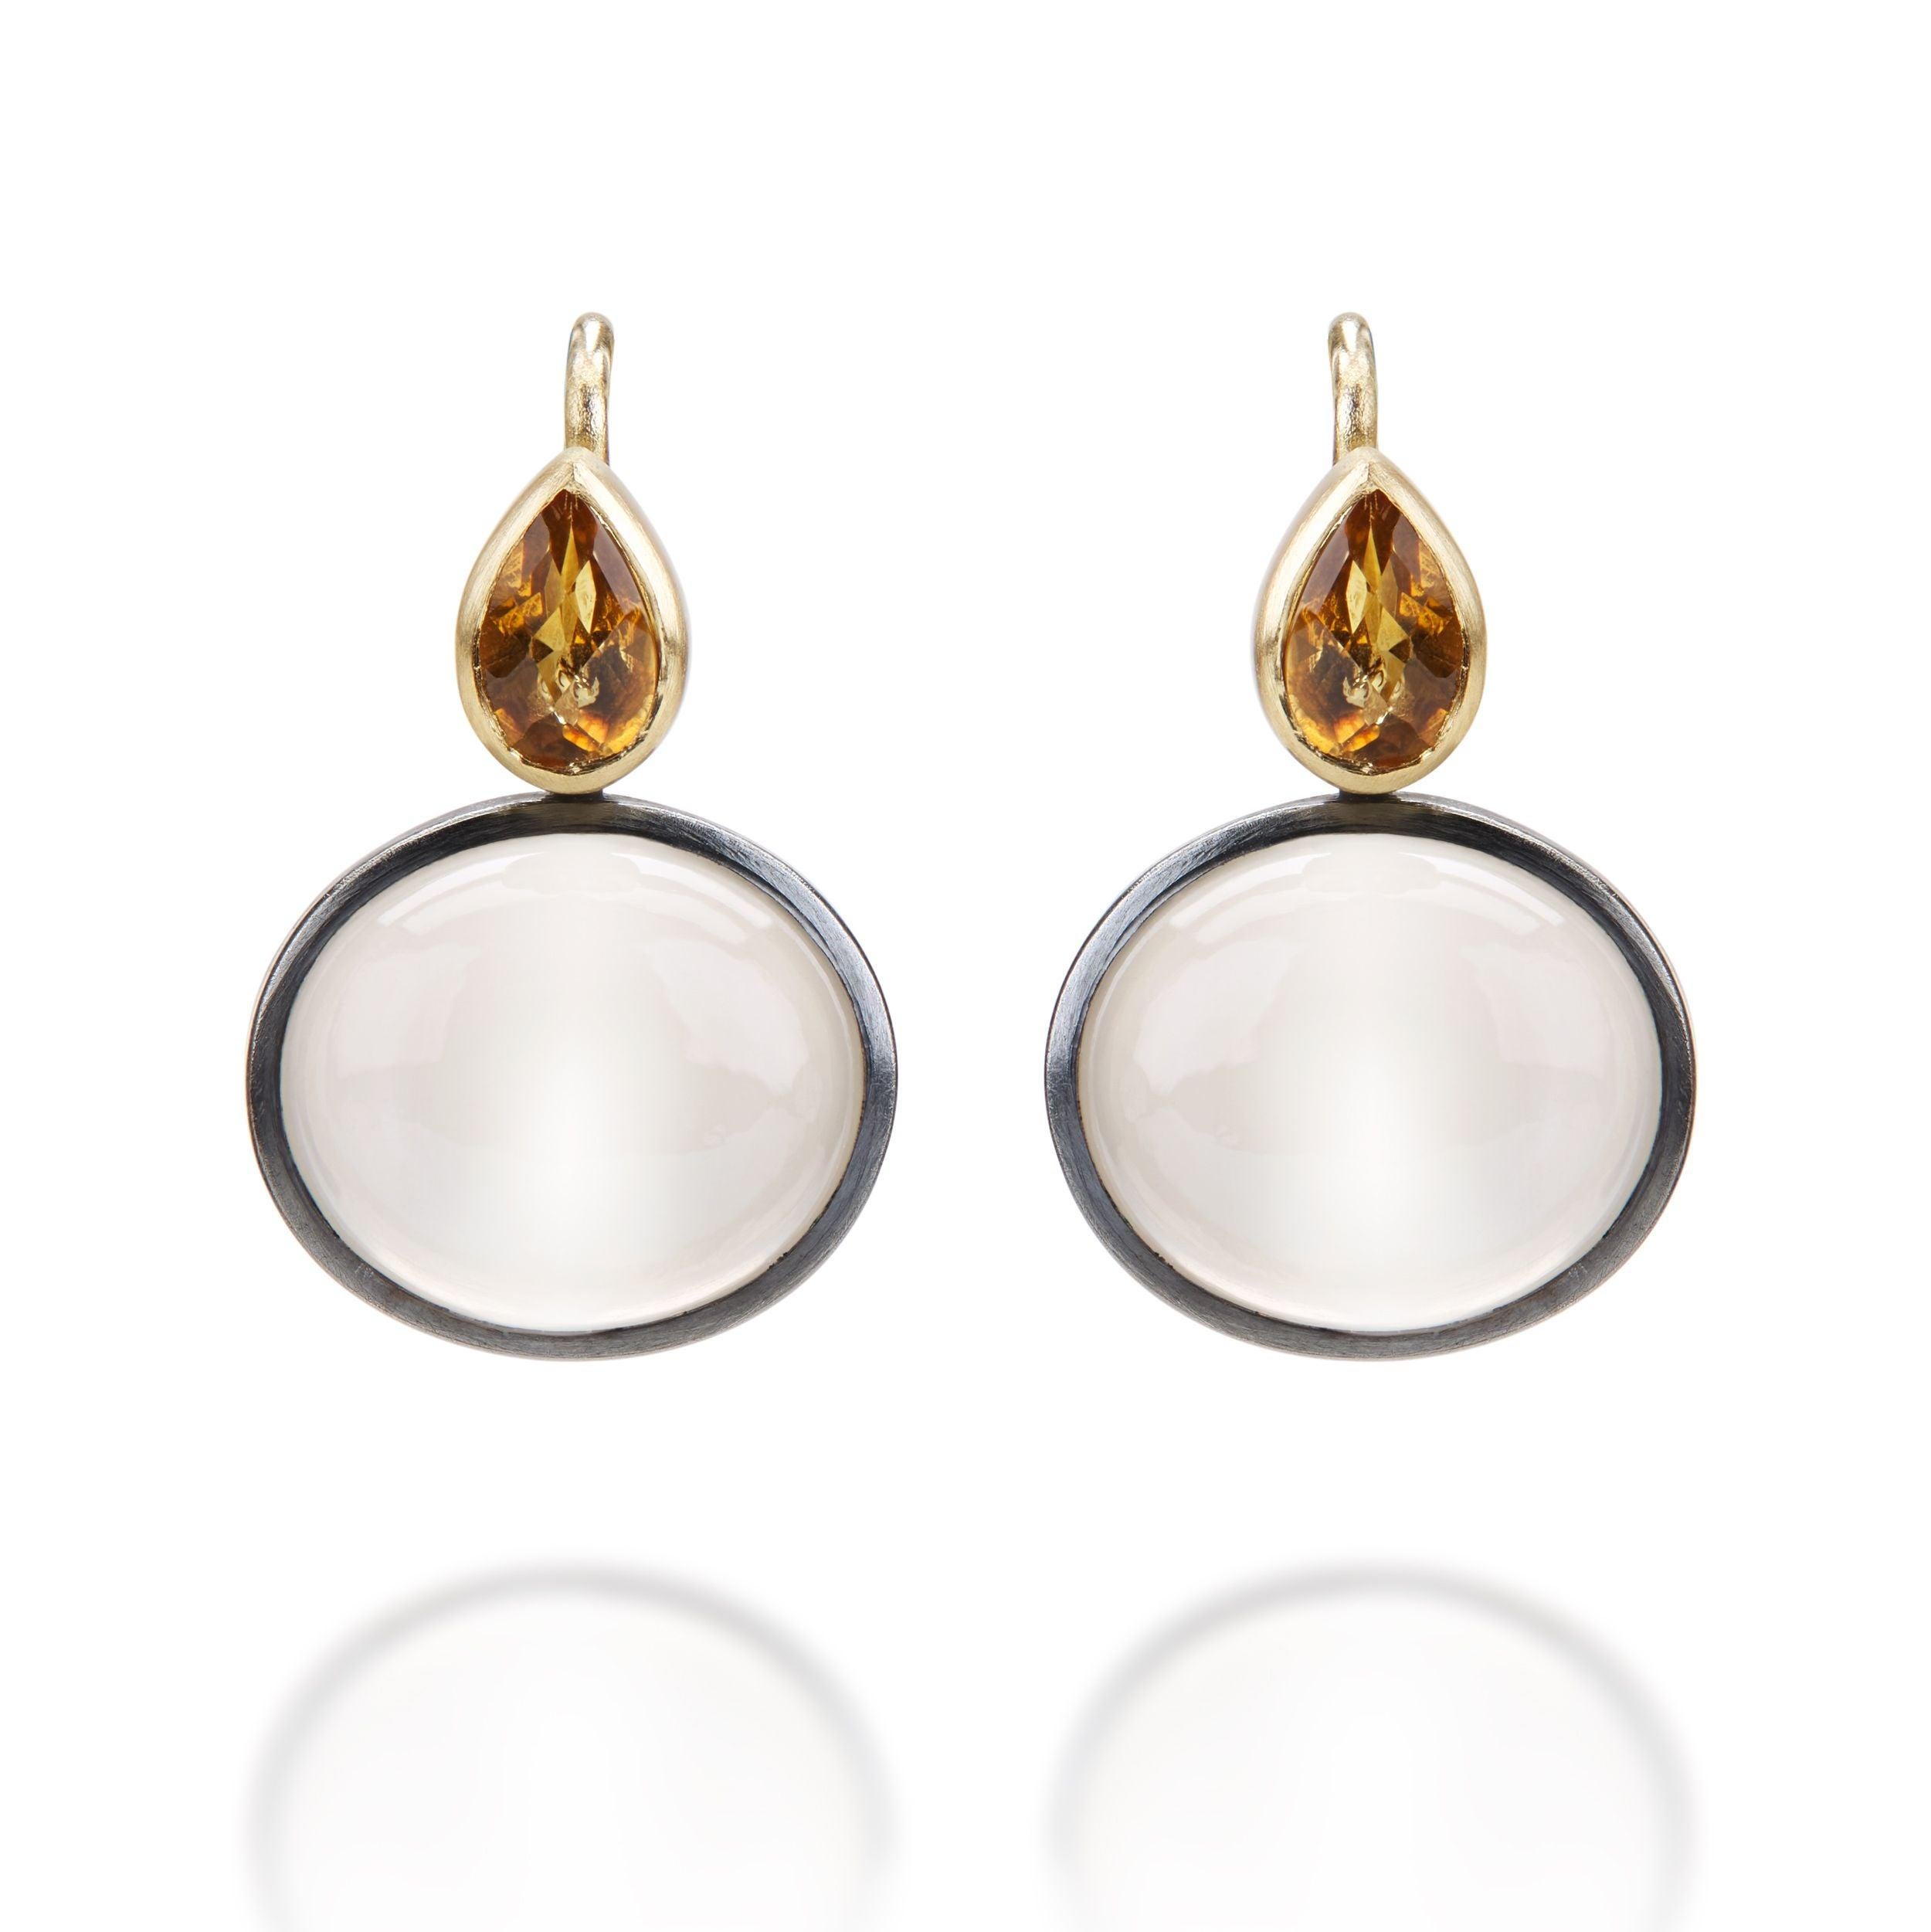 These very contemporary moonstone,citrine, 18K gold, and oxidised sterling silver drop pierced earrings are designed and made by London jeweler, Lucy Martin. Lucy creates art jewelry with a unique sense of color, composition and asymmetry. Inspired